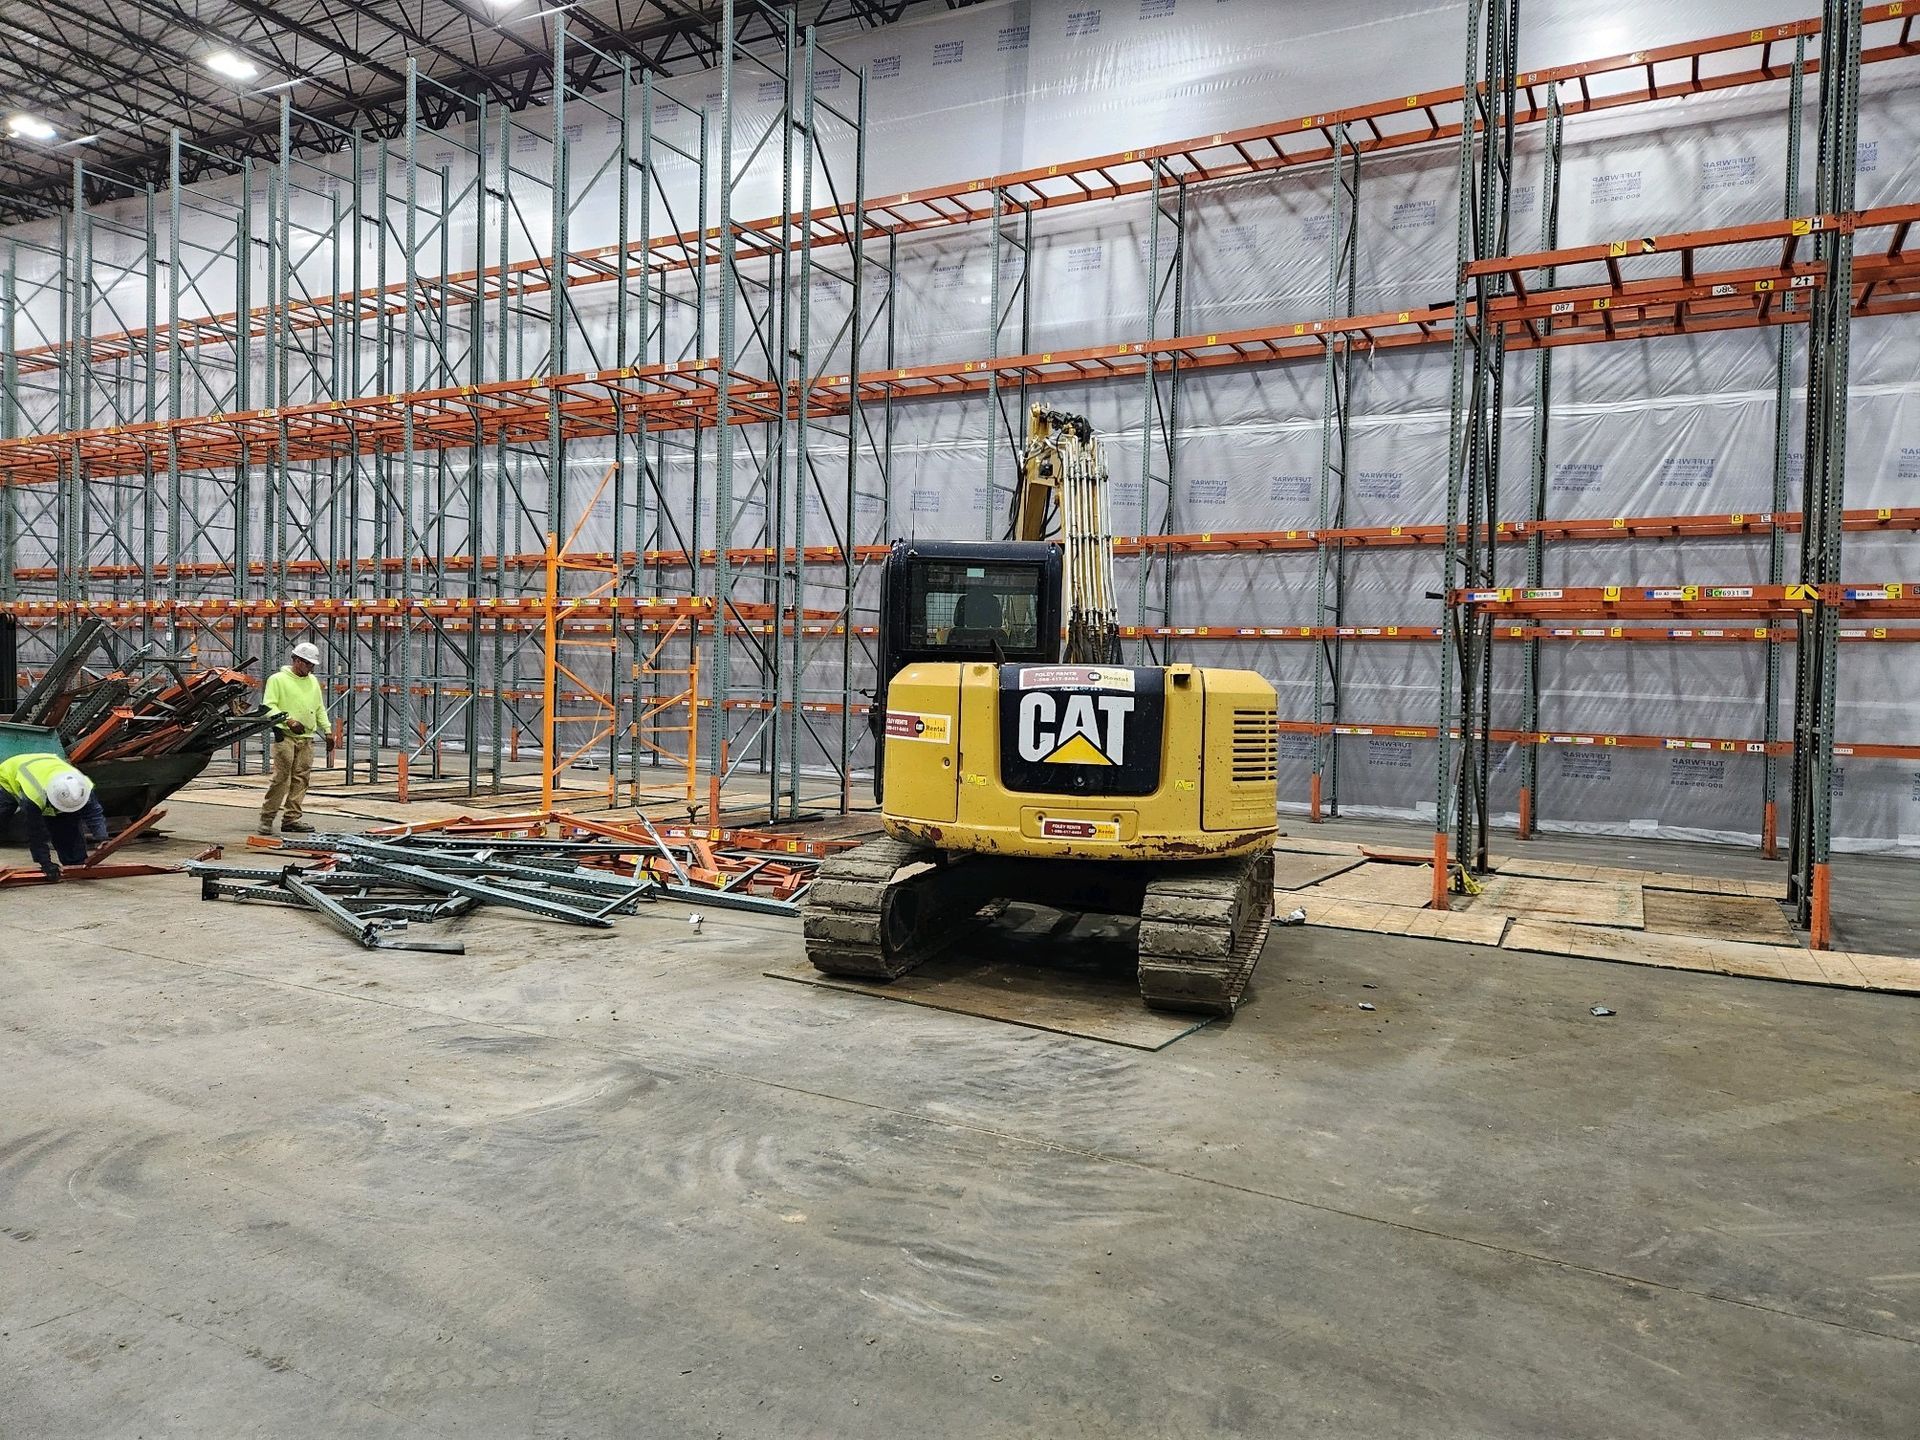 A yellow cat excavator is parked in a large warehouse.